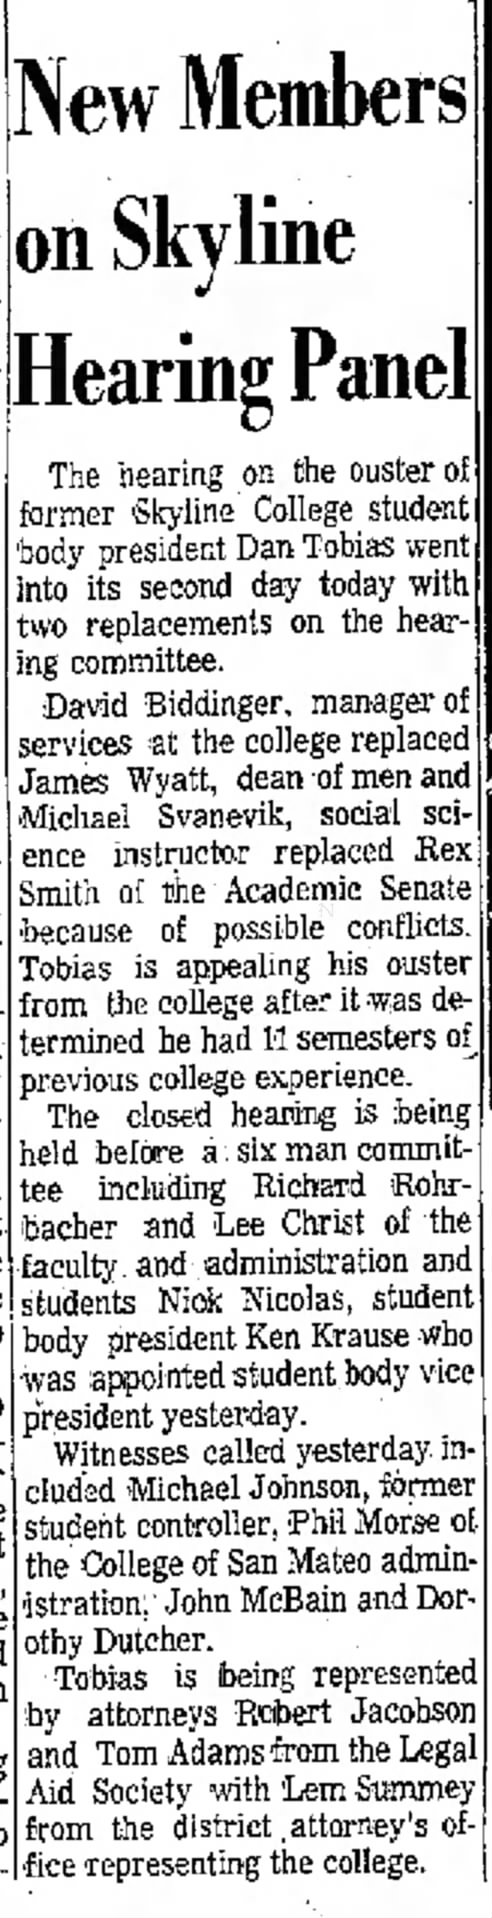 San Mateo Times 18 Nov 1970 Skyline College Hearing Panel includes mention of Dorothy Dutcher